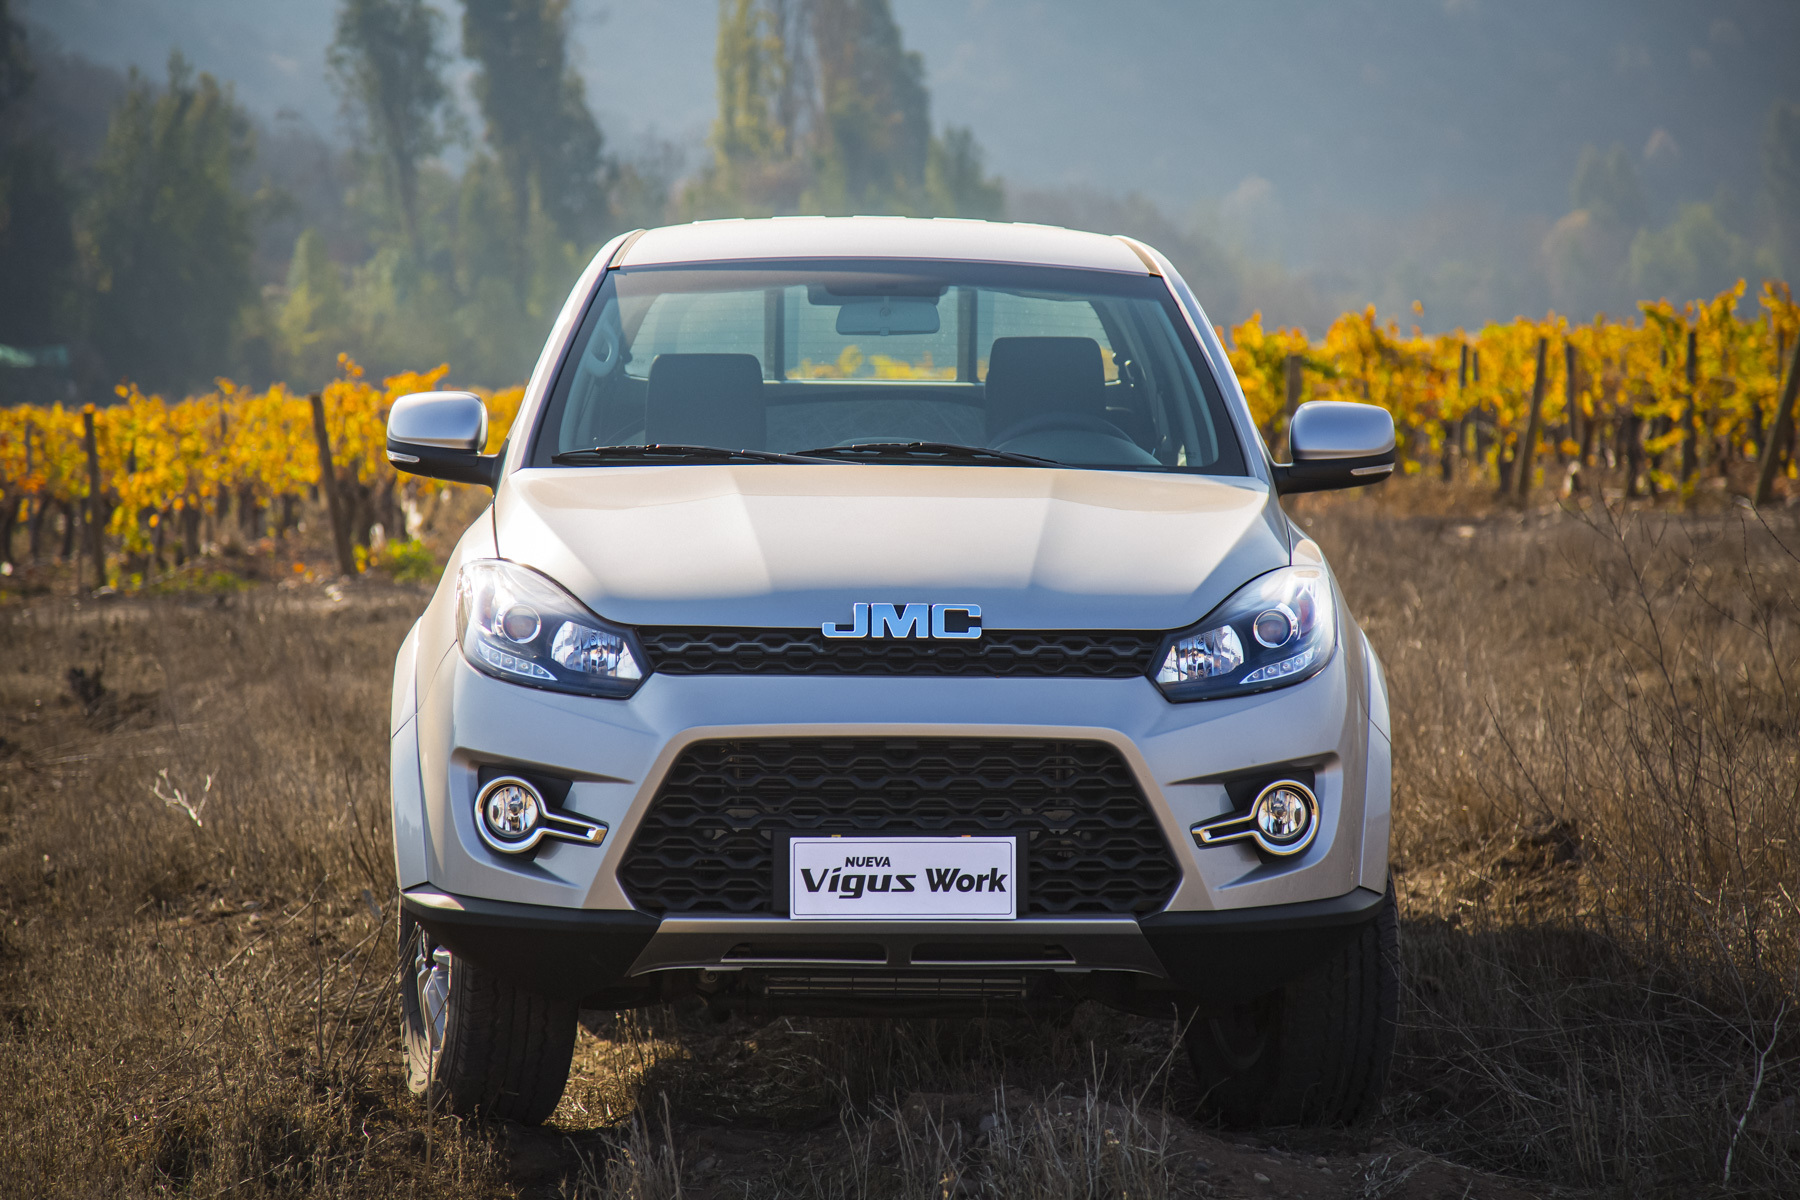 In Russian car dealerships they sell a new Chinese pickup truck JMC Vigus Work from 3.1 million rubles